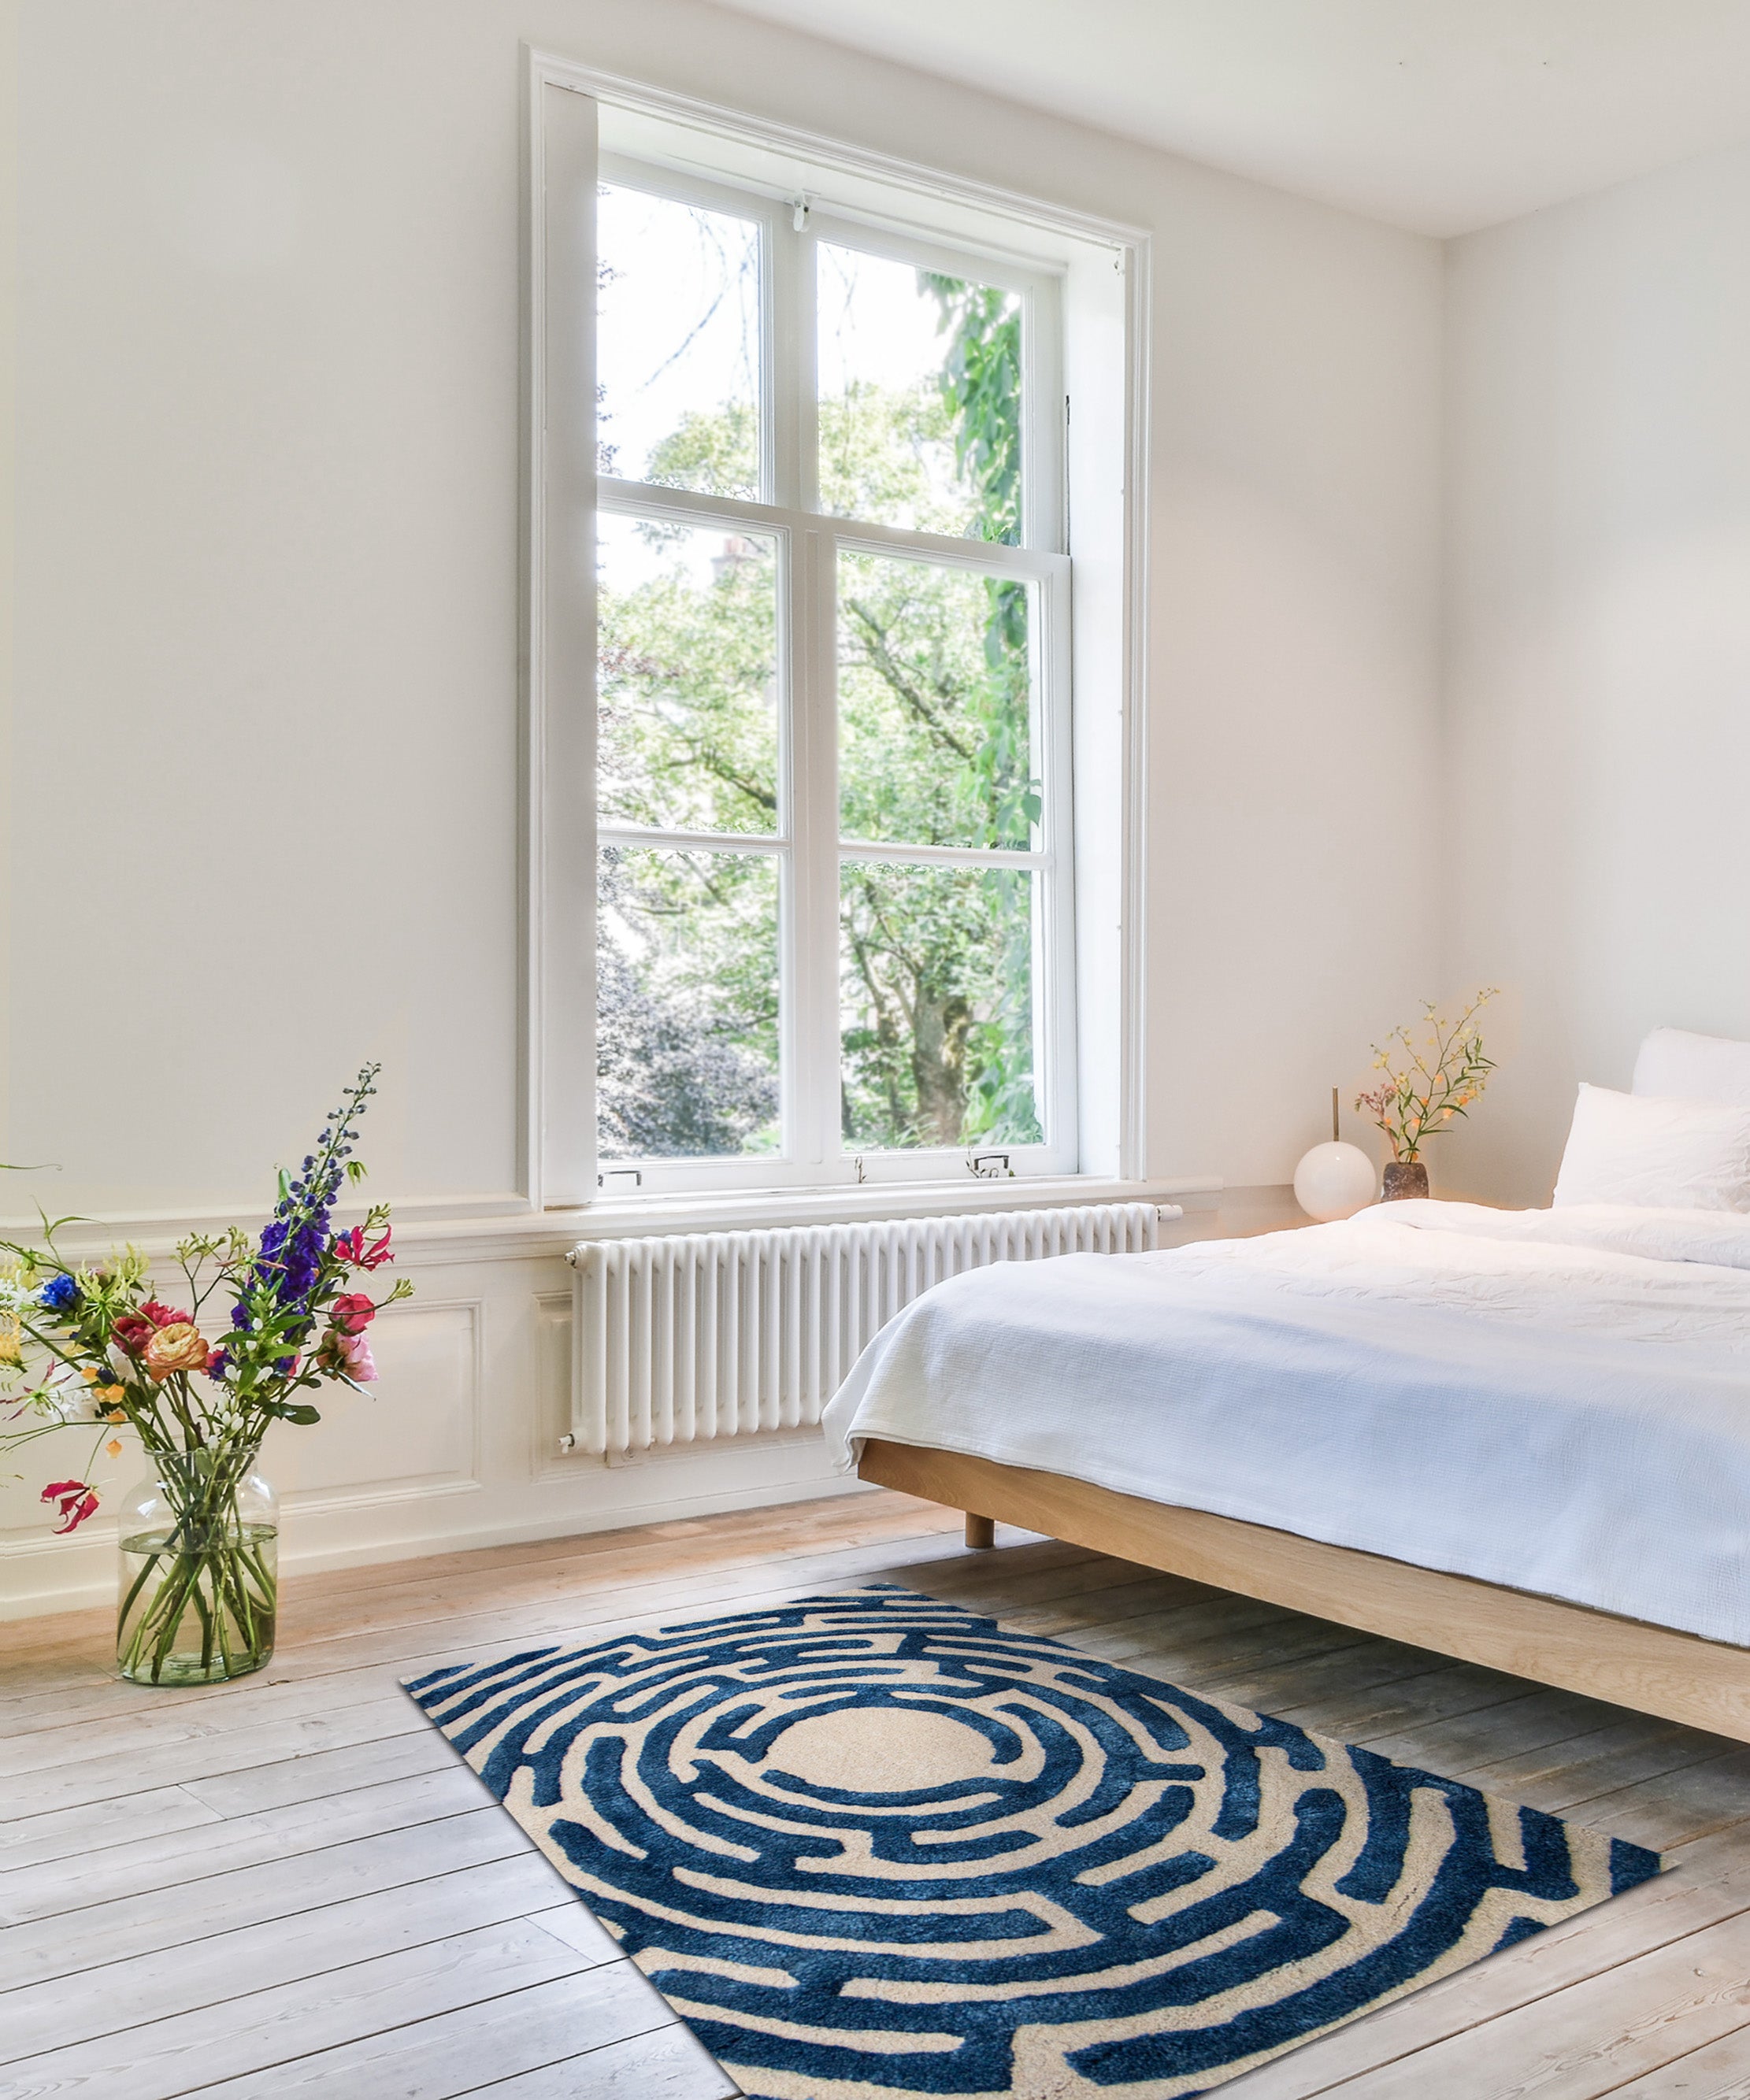 Tips for Finding the Perfect Bedroom Rug